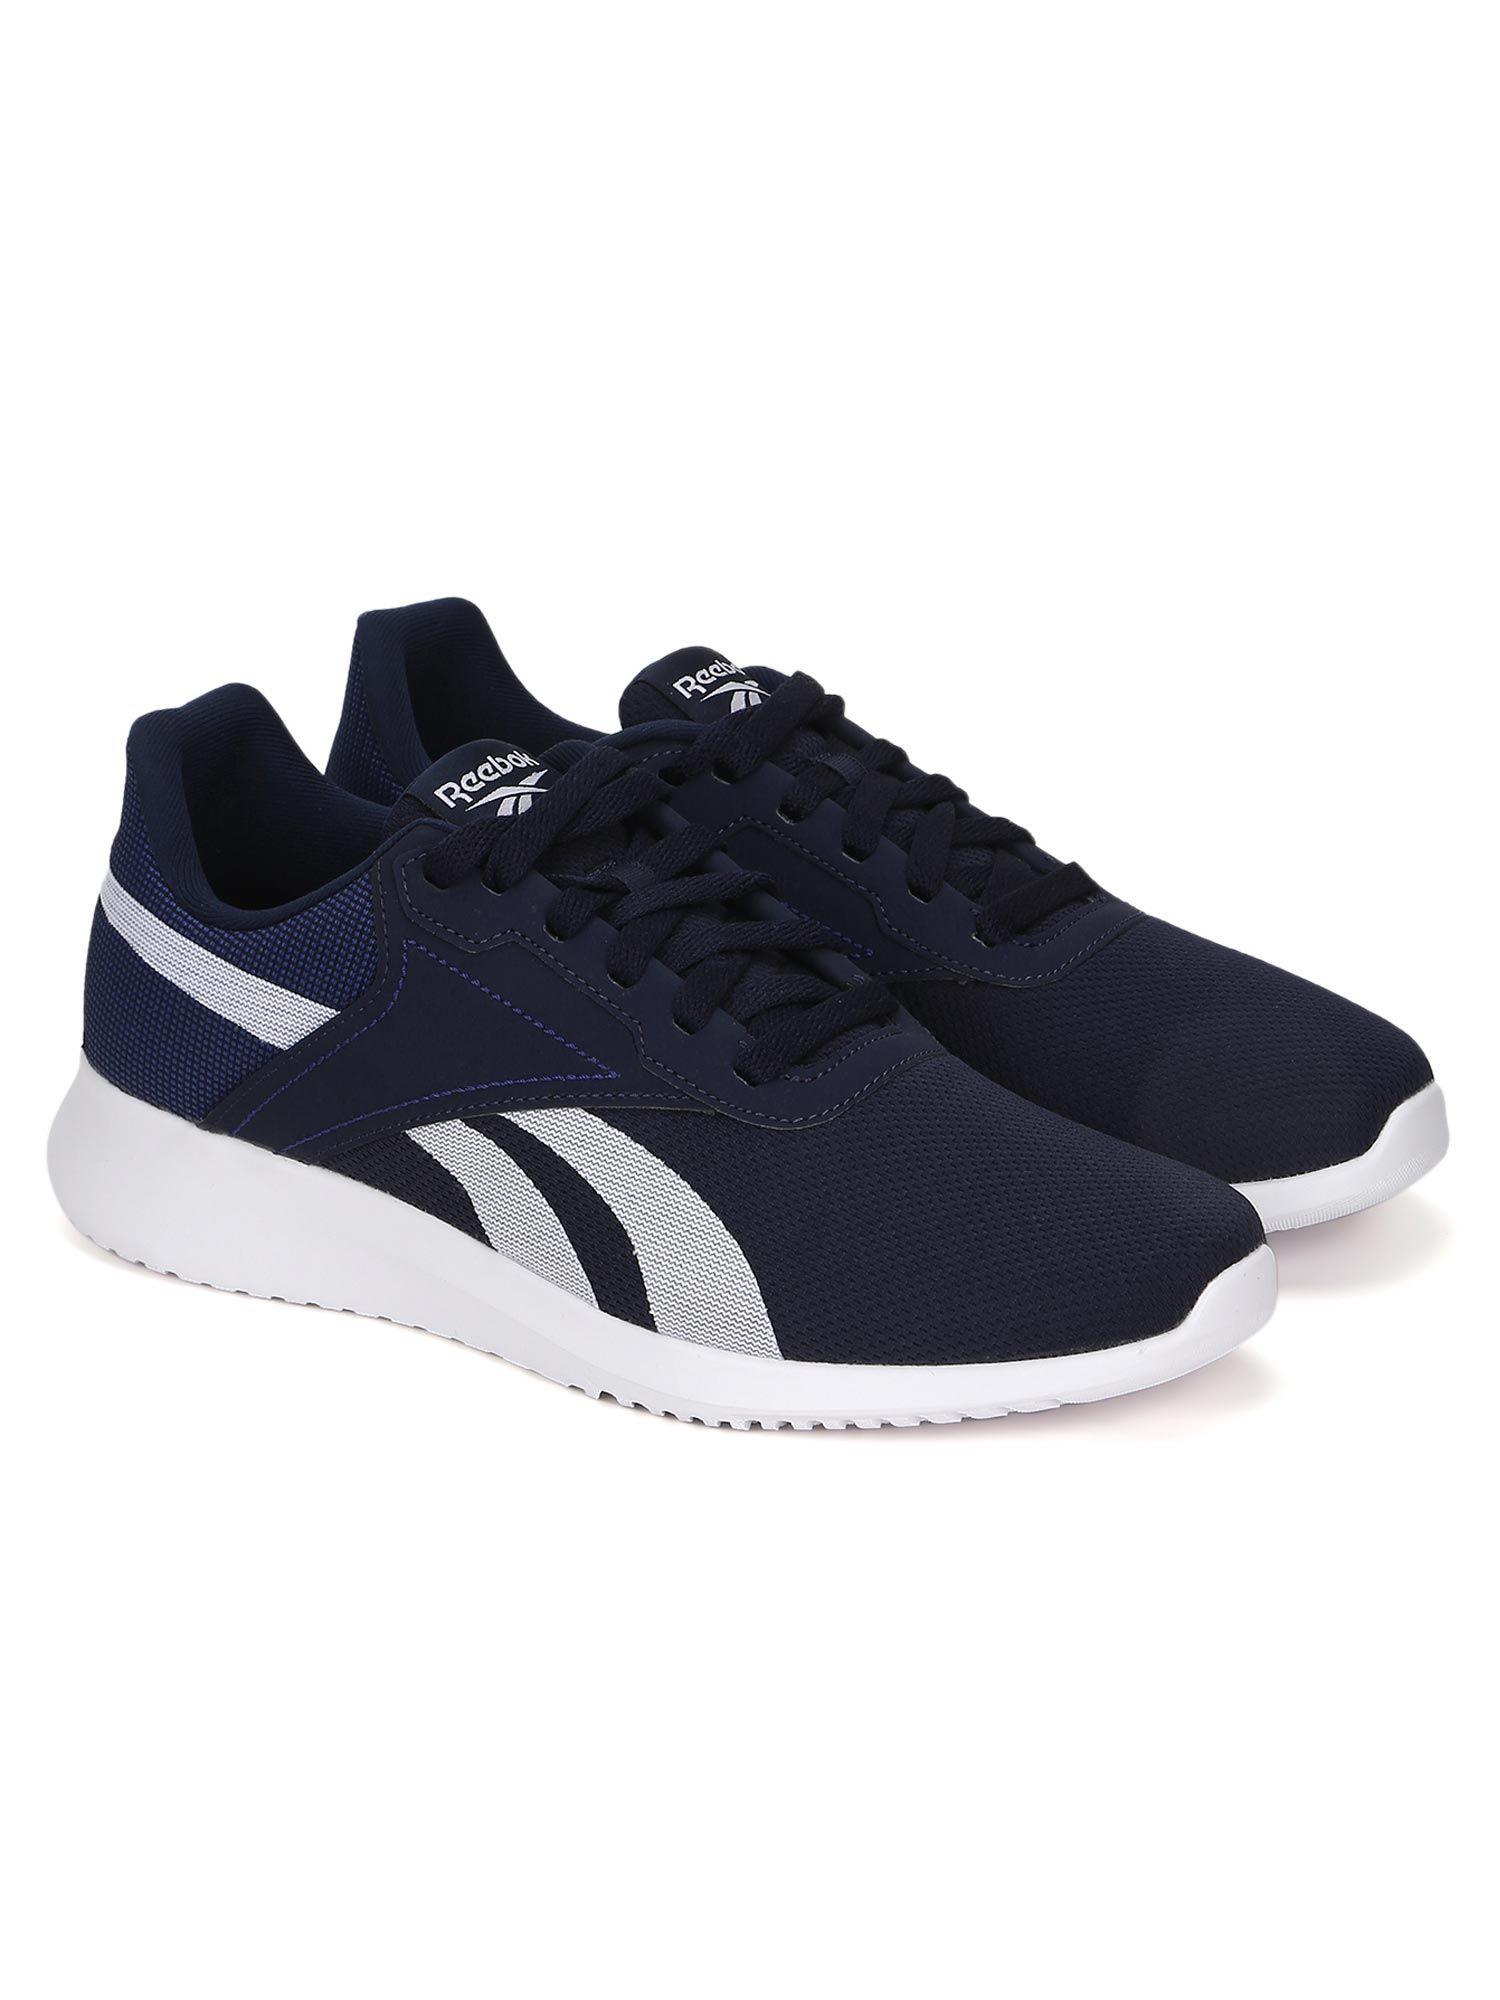 mens inspired trainer navy blue training shoes